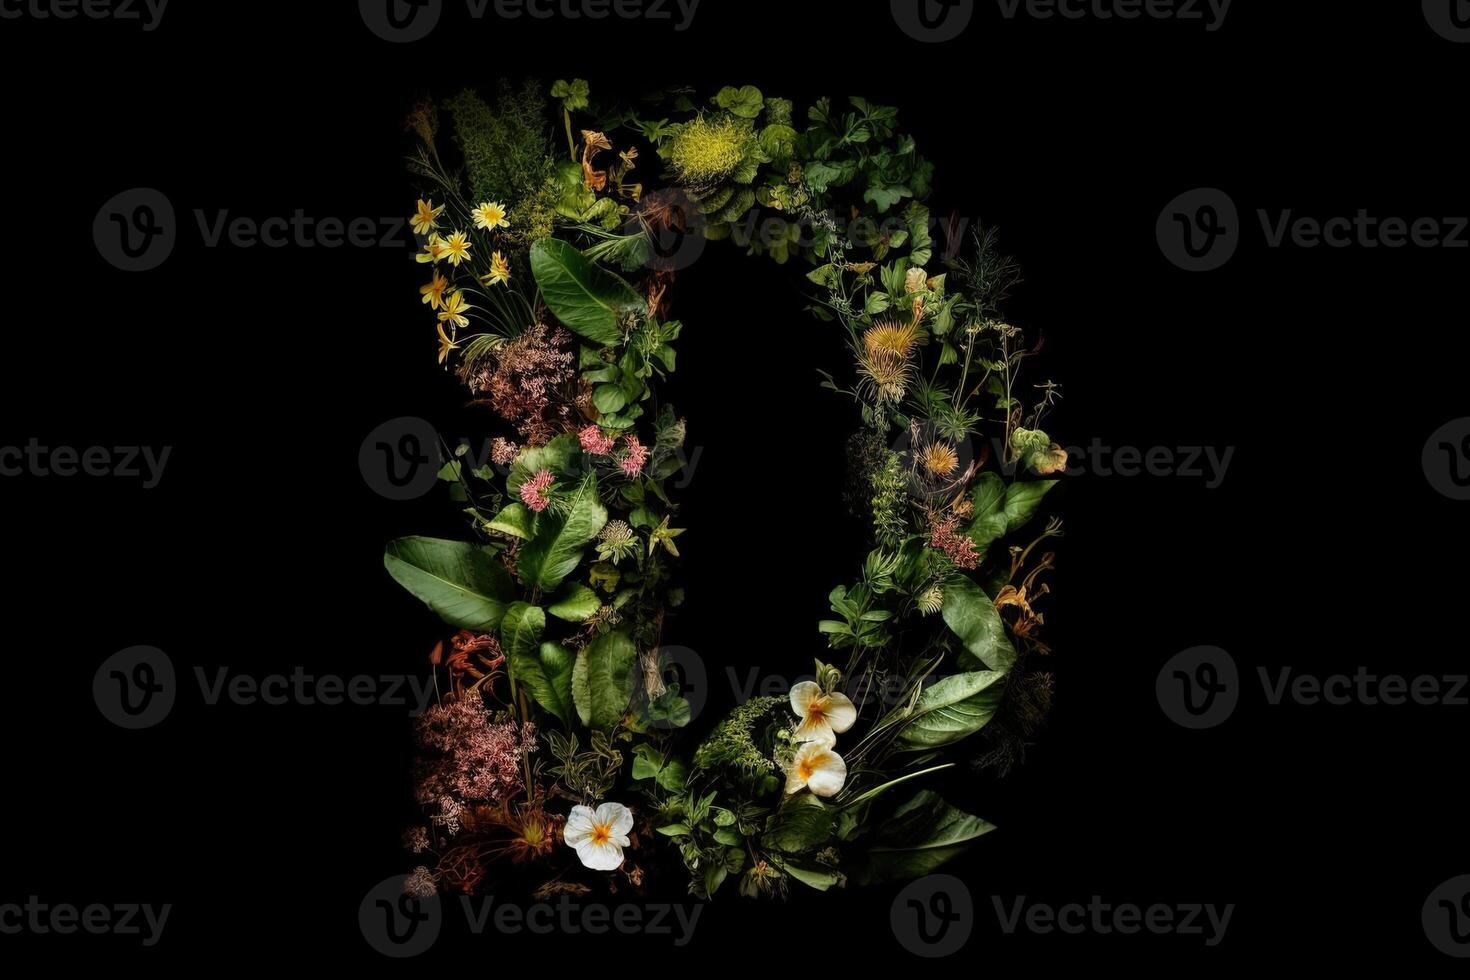 D alphabet letter made out of leaves plants and flowers isolated on black background illustration photo